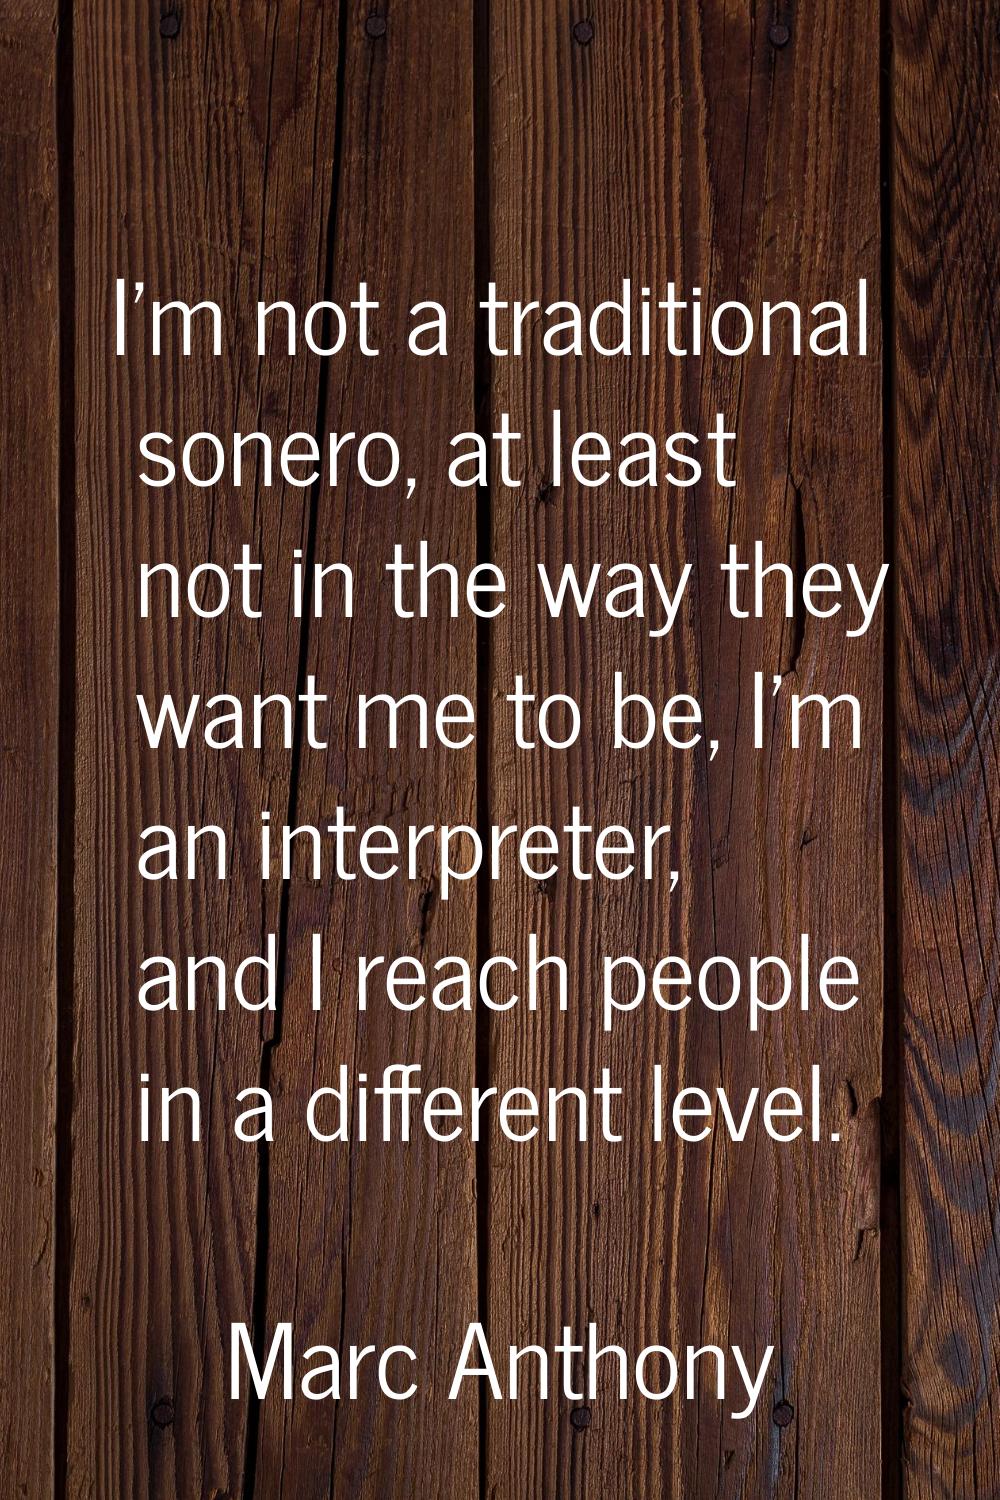 I'm not a traditional sonero, at least not in the way they want me to be, I'm an interpreter, and I